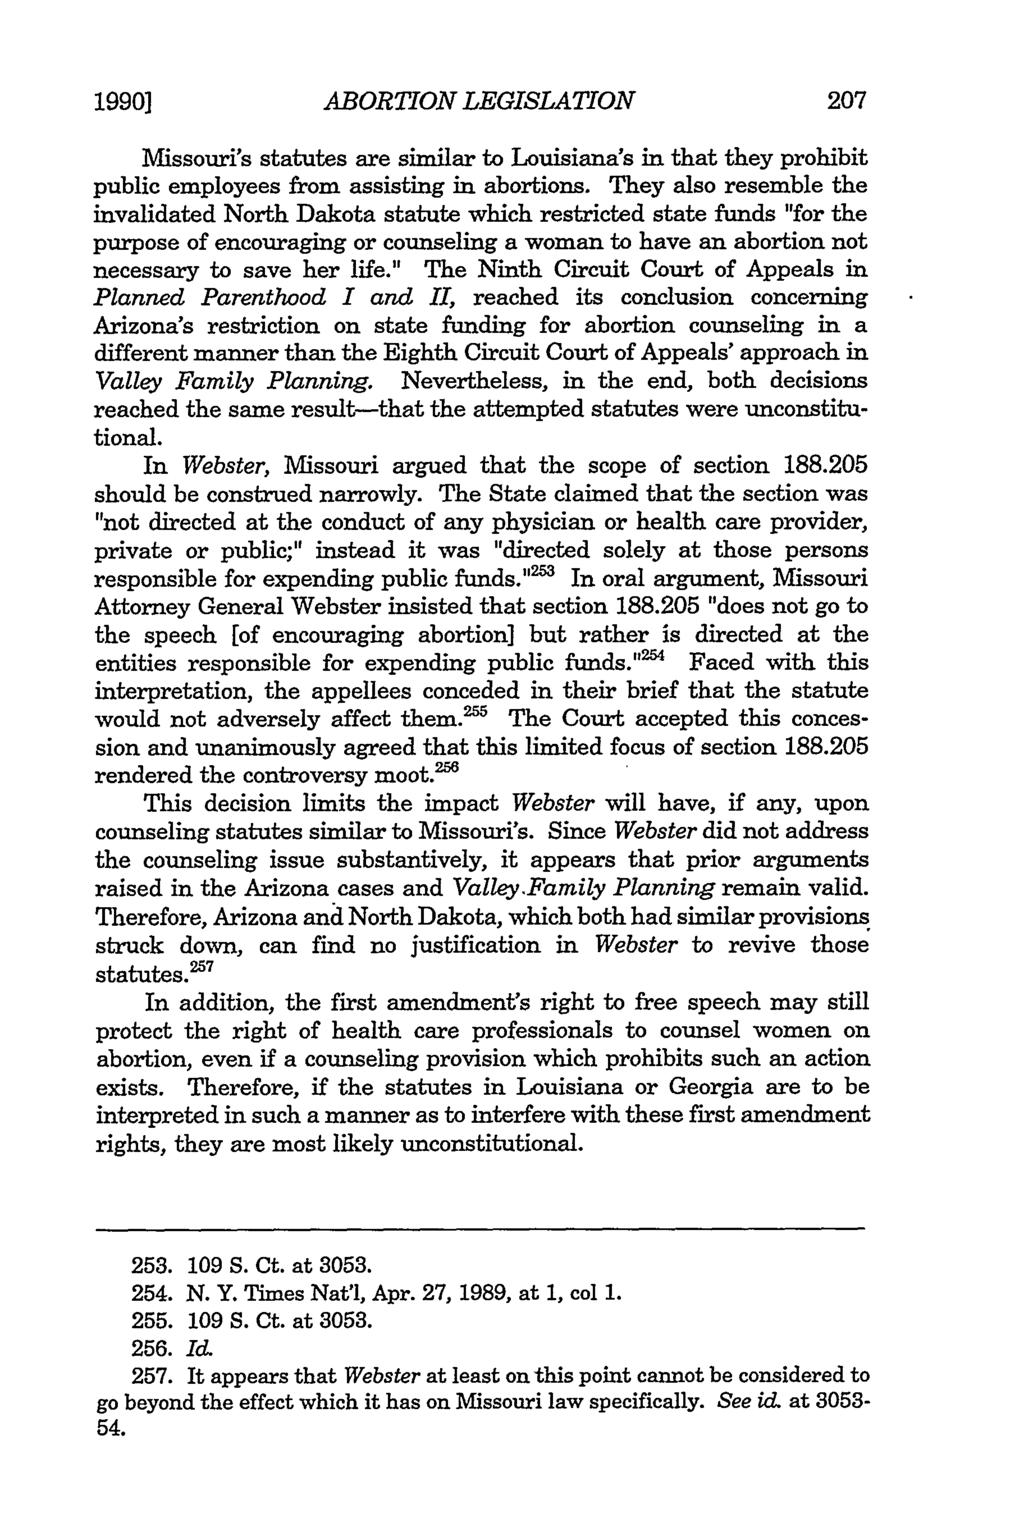 1990] Eggert et al.: Eggert: Of Winks and Nods ABORTION LEGISLATION Missouri's statutes are similar to Louisiana's in that they prohibit public employees from assisting in abortions.